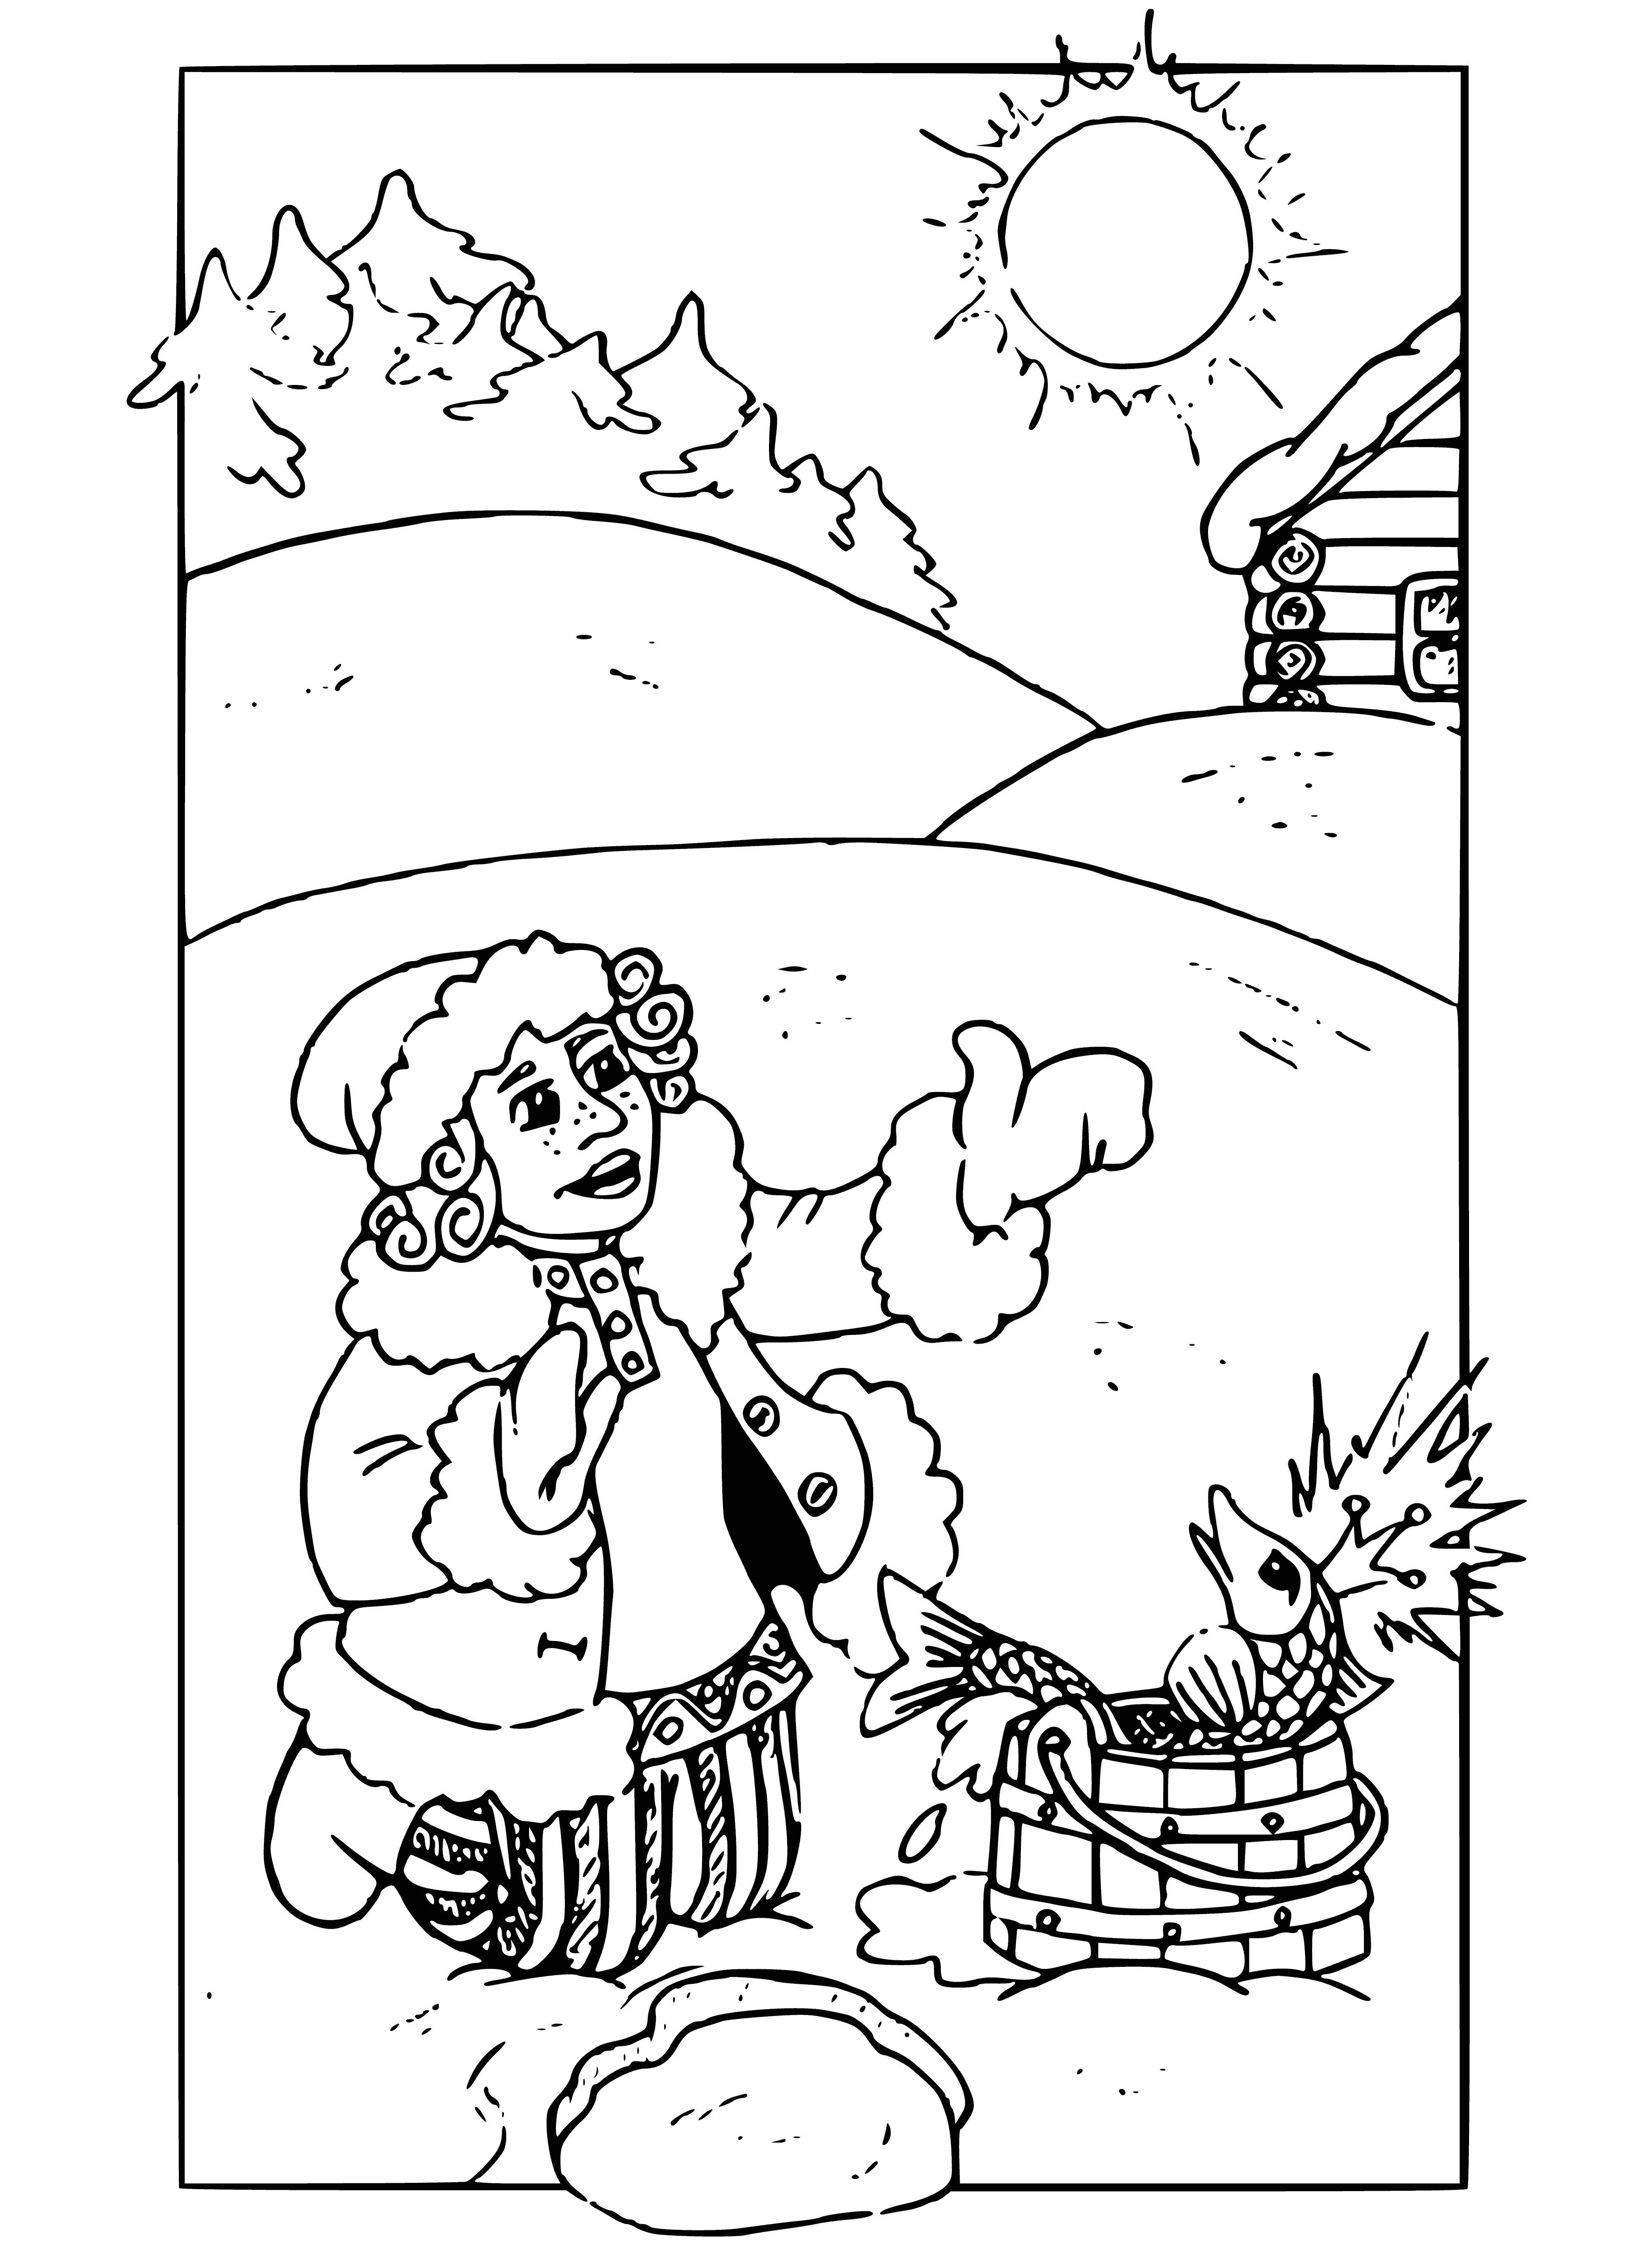 coloring page: Emelya, the lazy character in red & blue, sits near a river with a sack next to him, always looking for an easy way to do things.